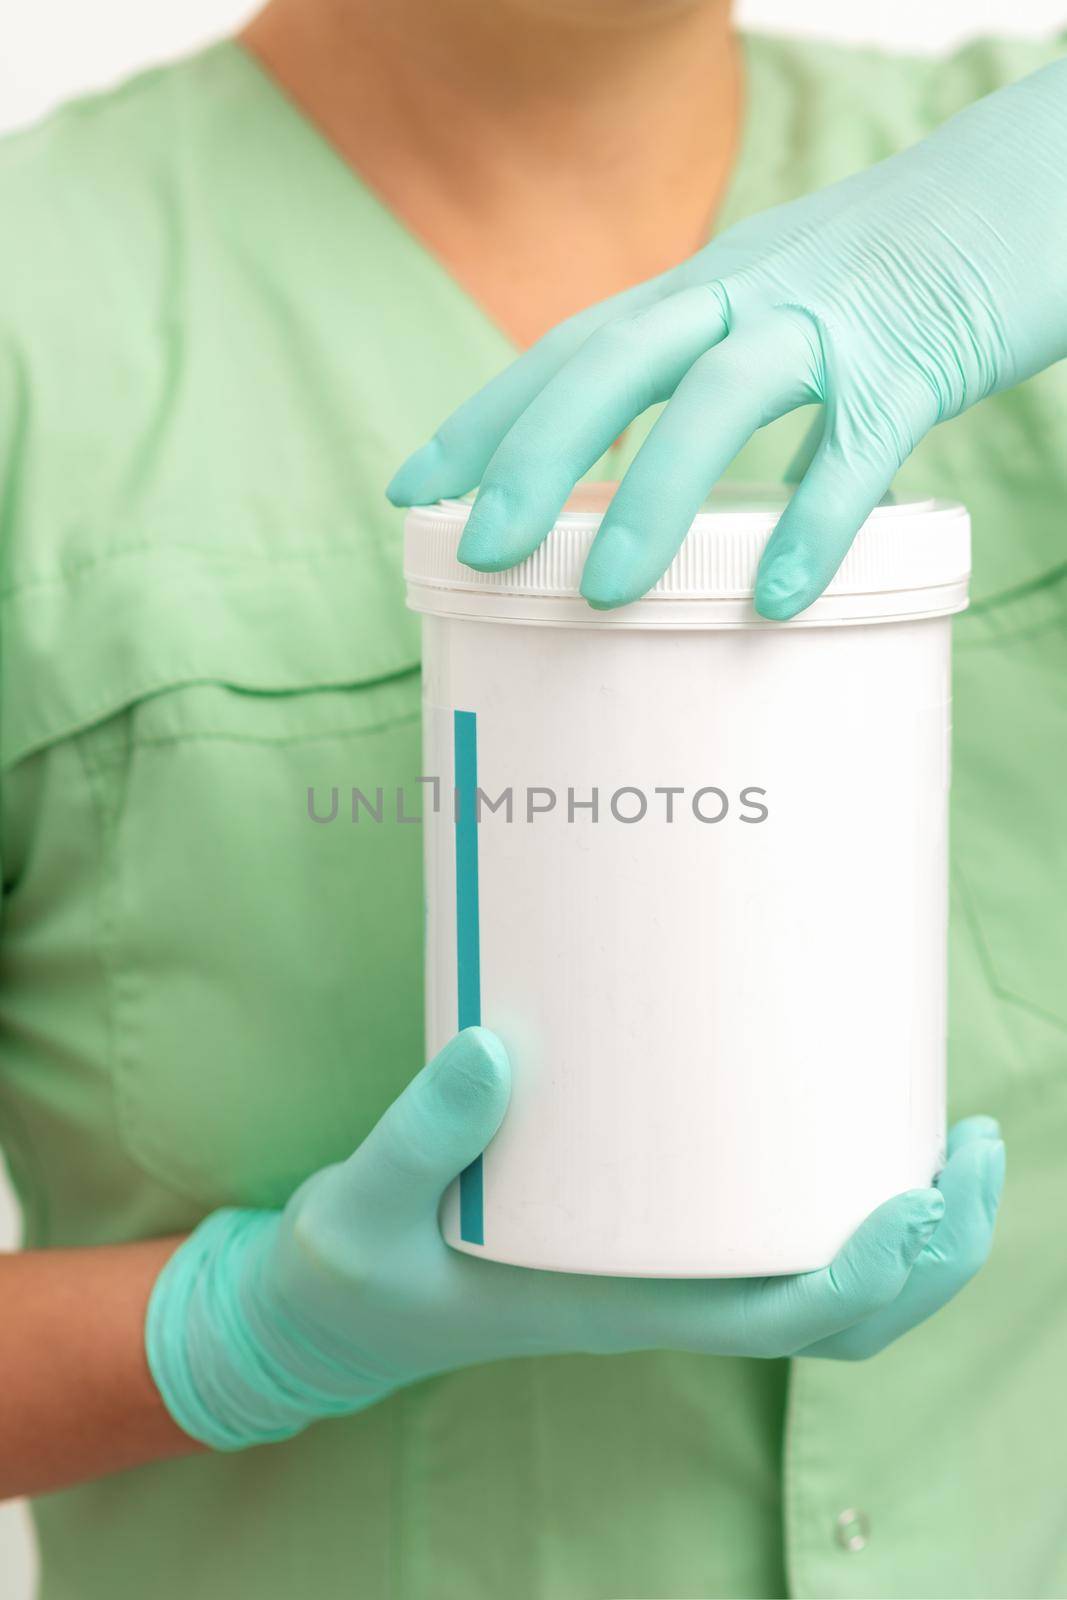 Hands in protective gloves of beautician open a white body cream jar on white background